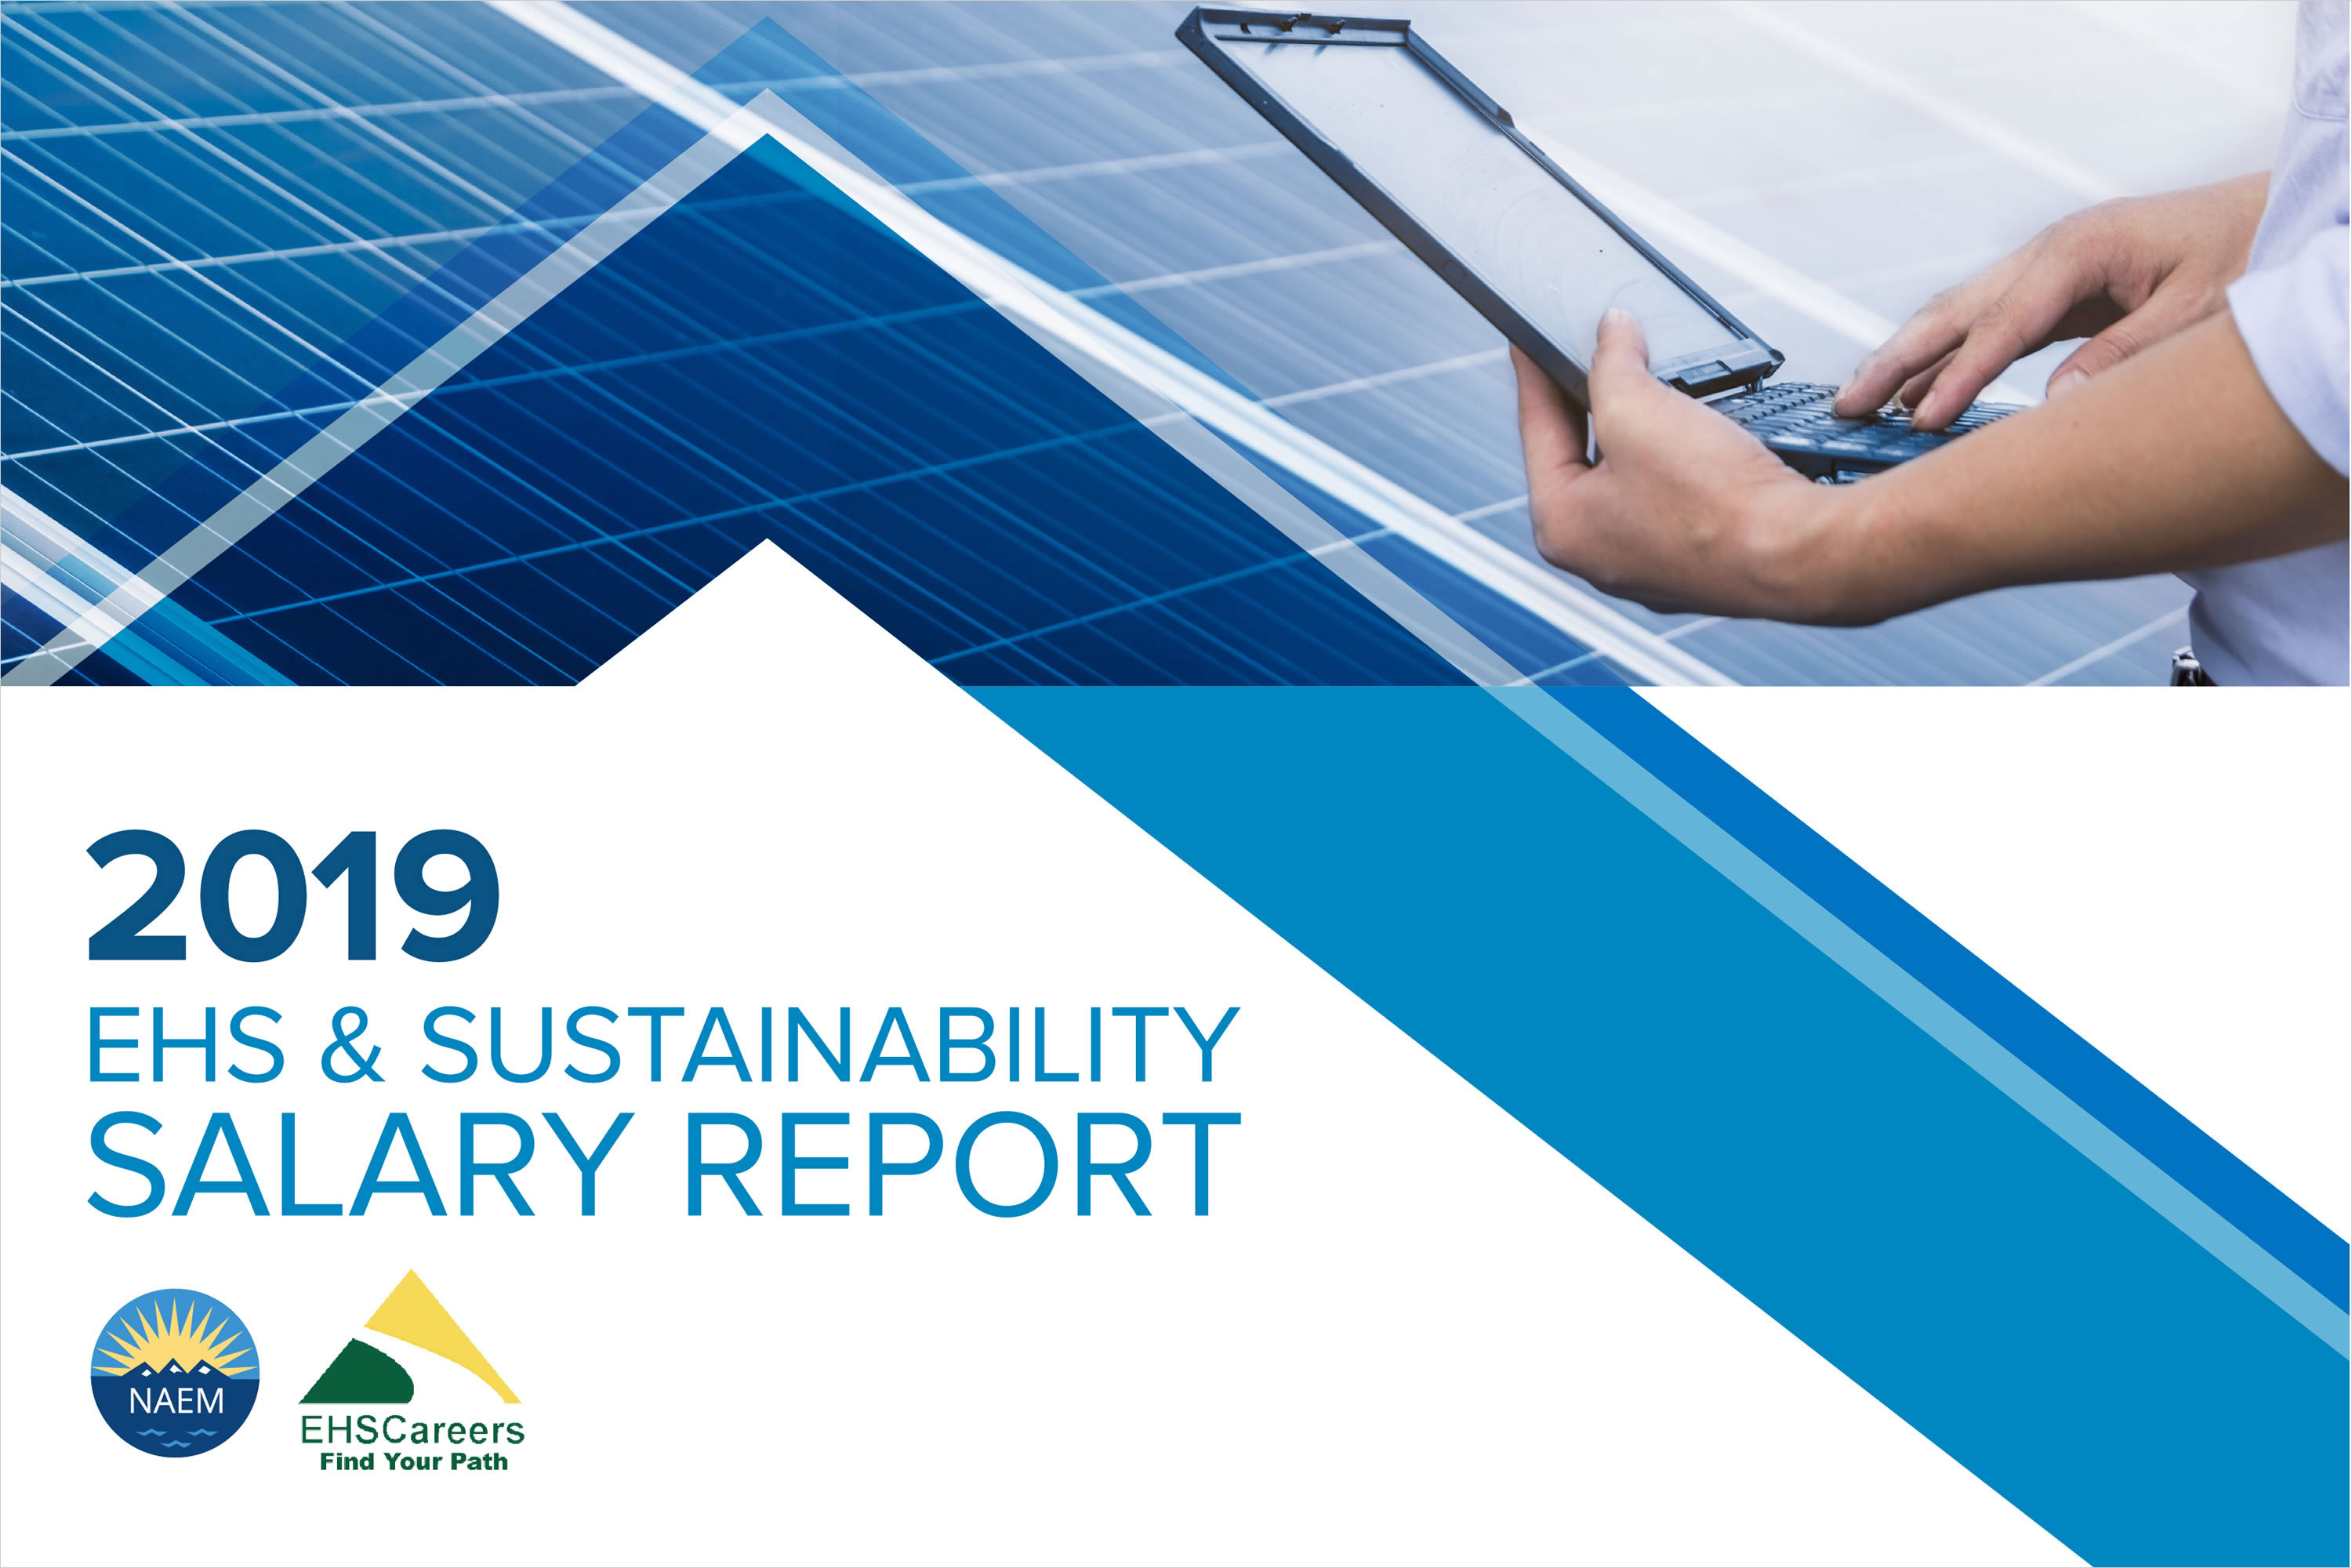 2019 EHS & Sustainability Salary Report